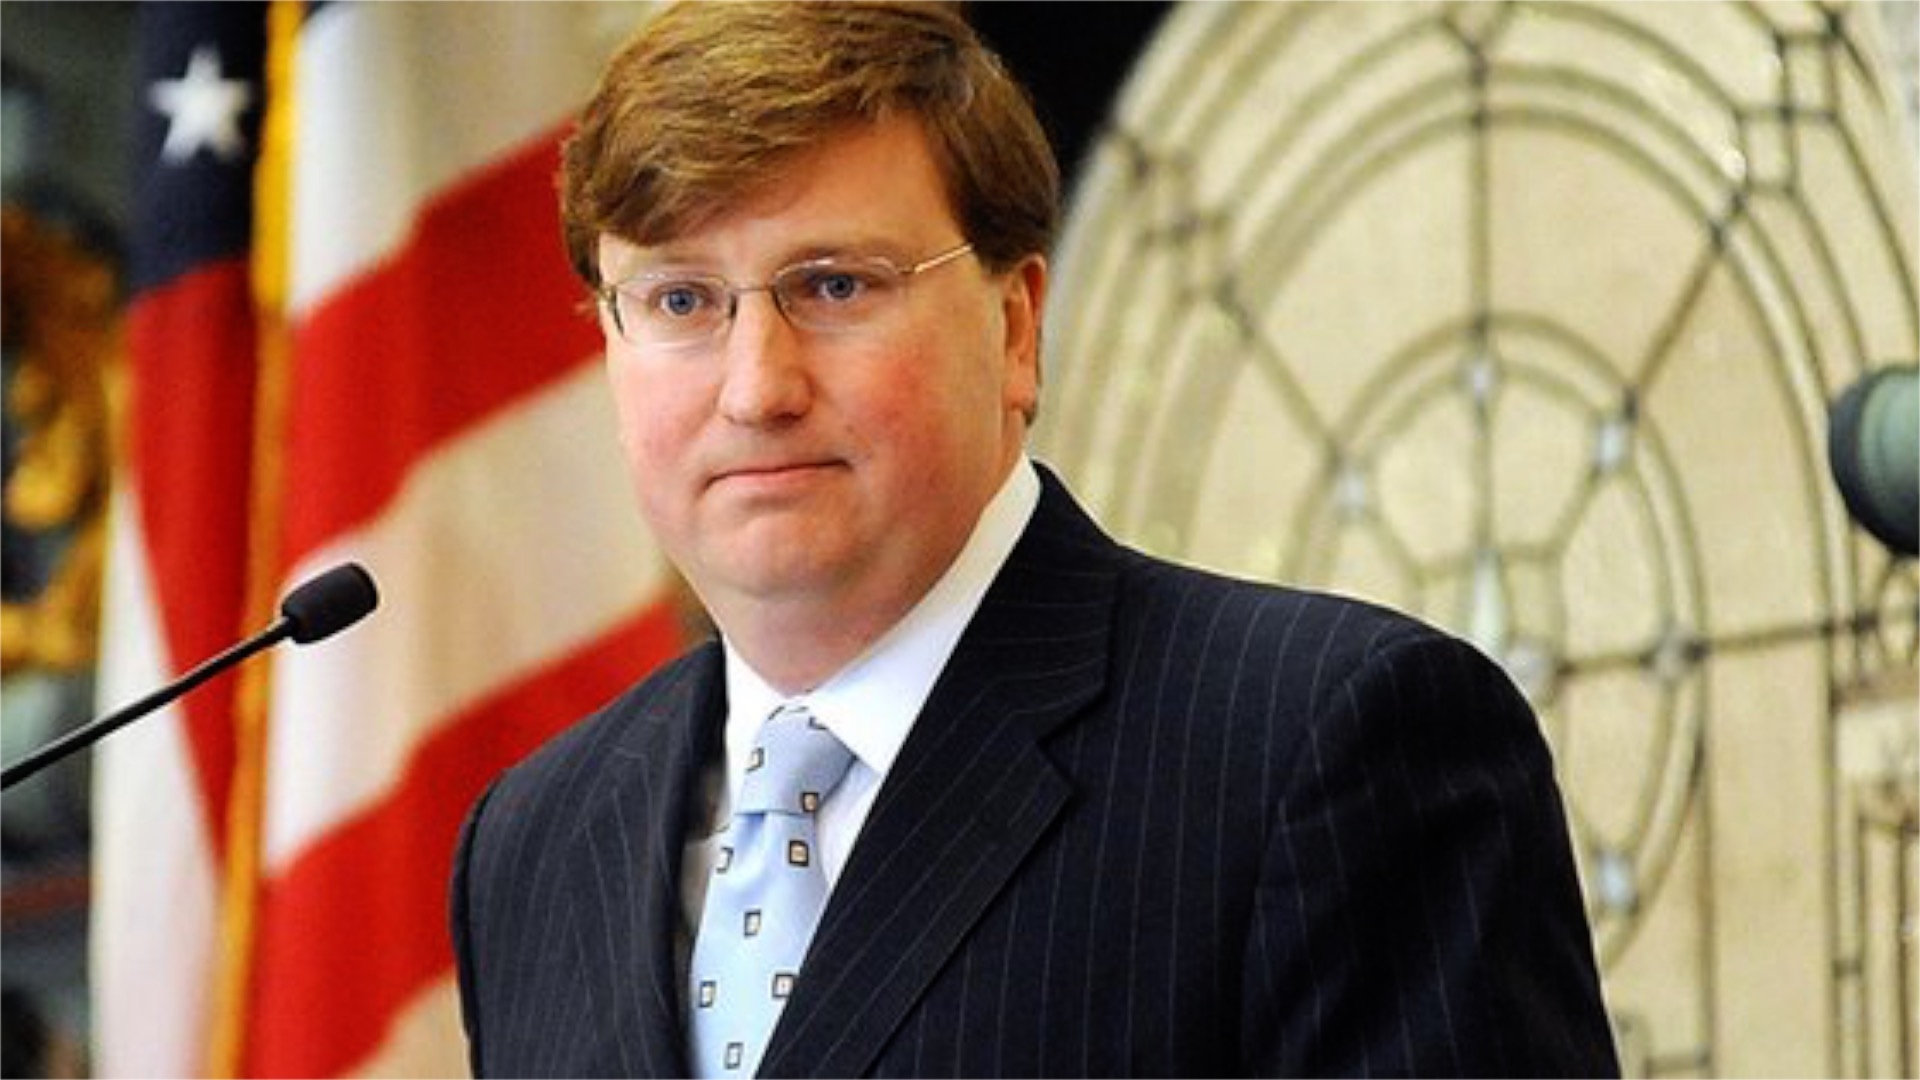 Who is Tate Reeves   the Current Governors of Mississippi